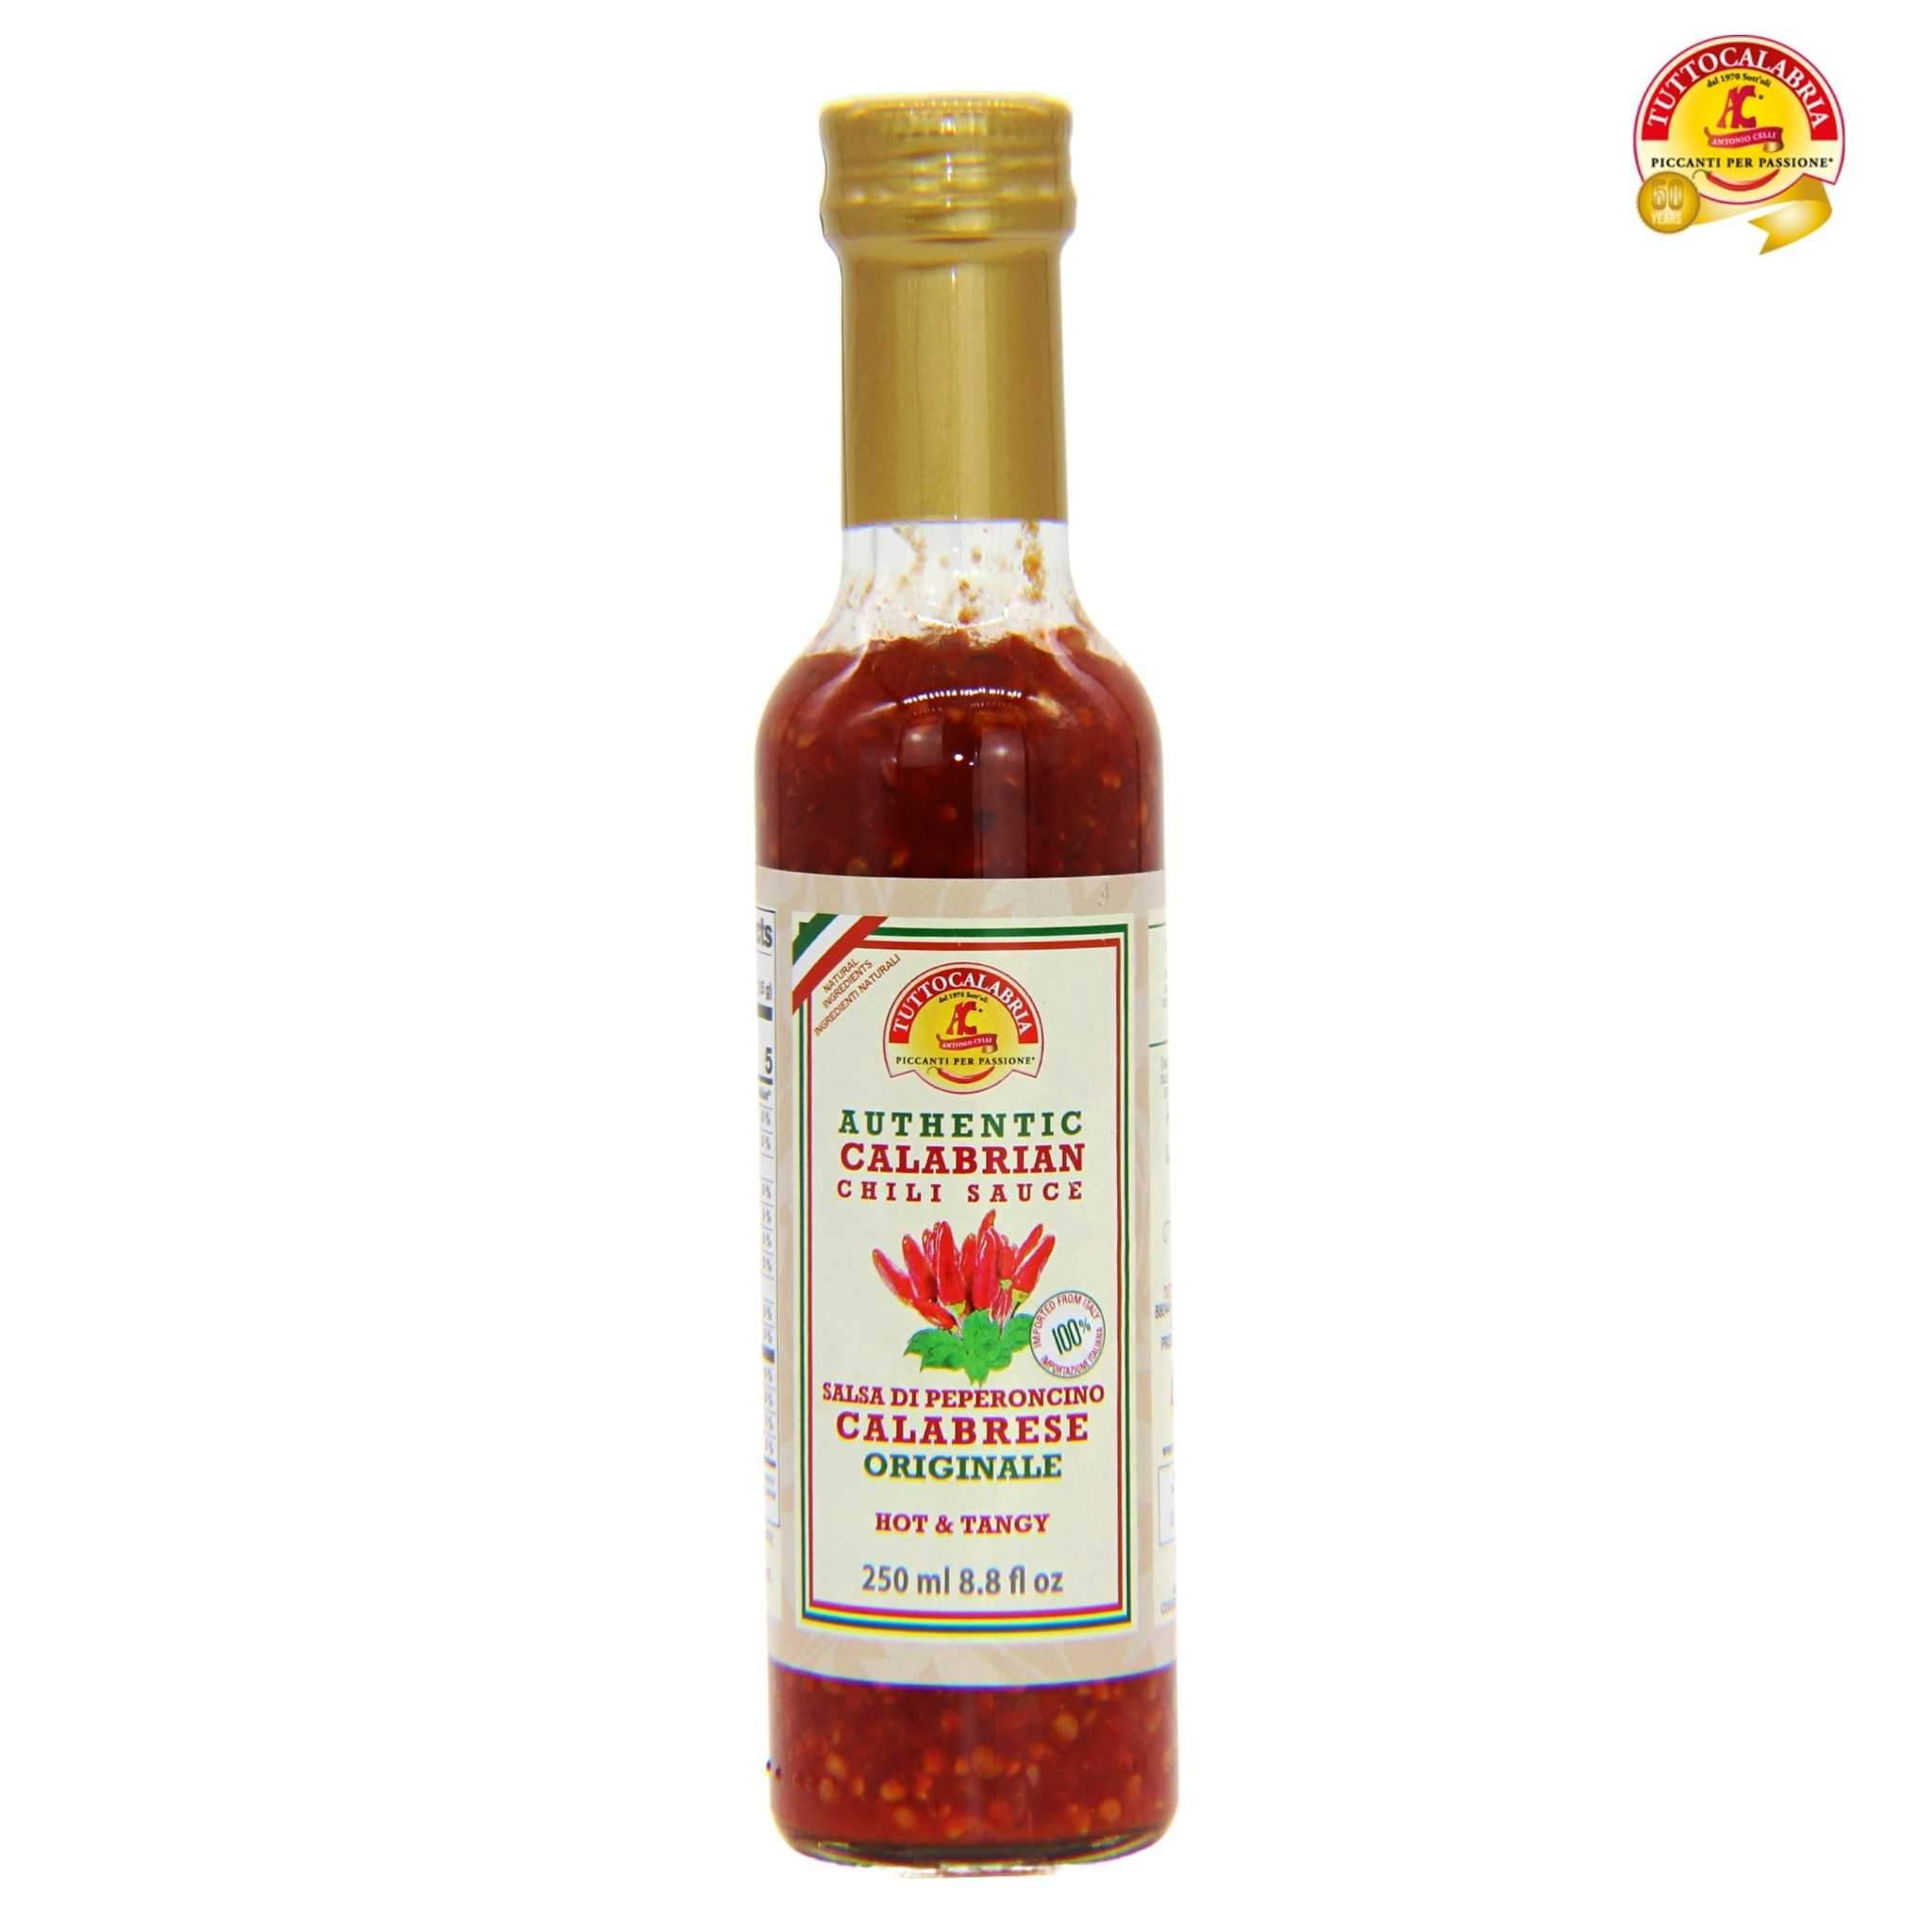 Calabrian Chili Hot Sauce "Hot & Tangy" by Tutto Calabria 8.8oz.